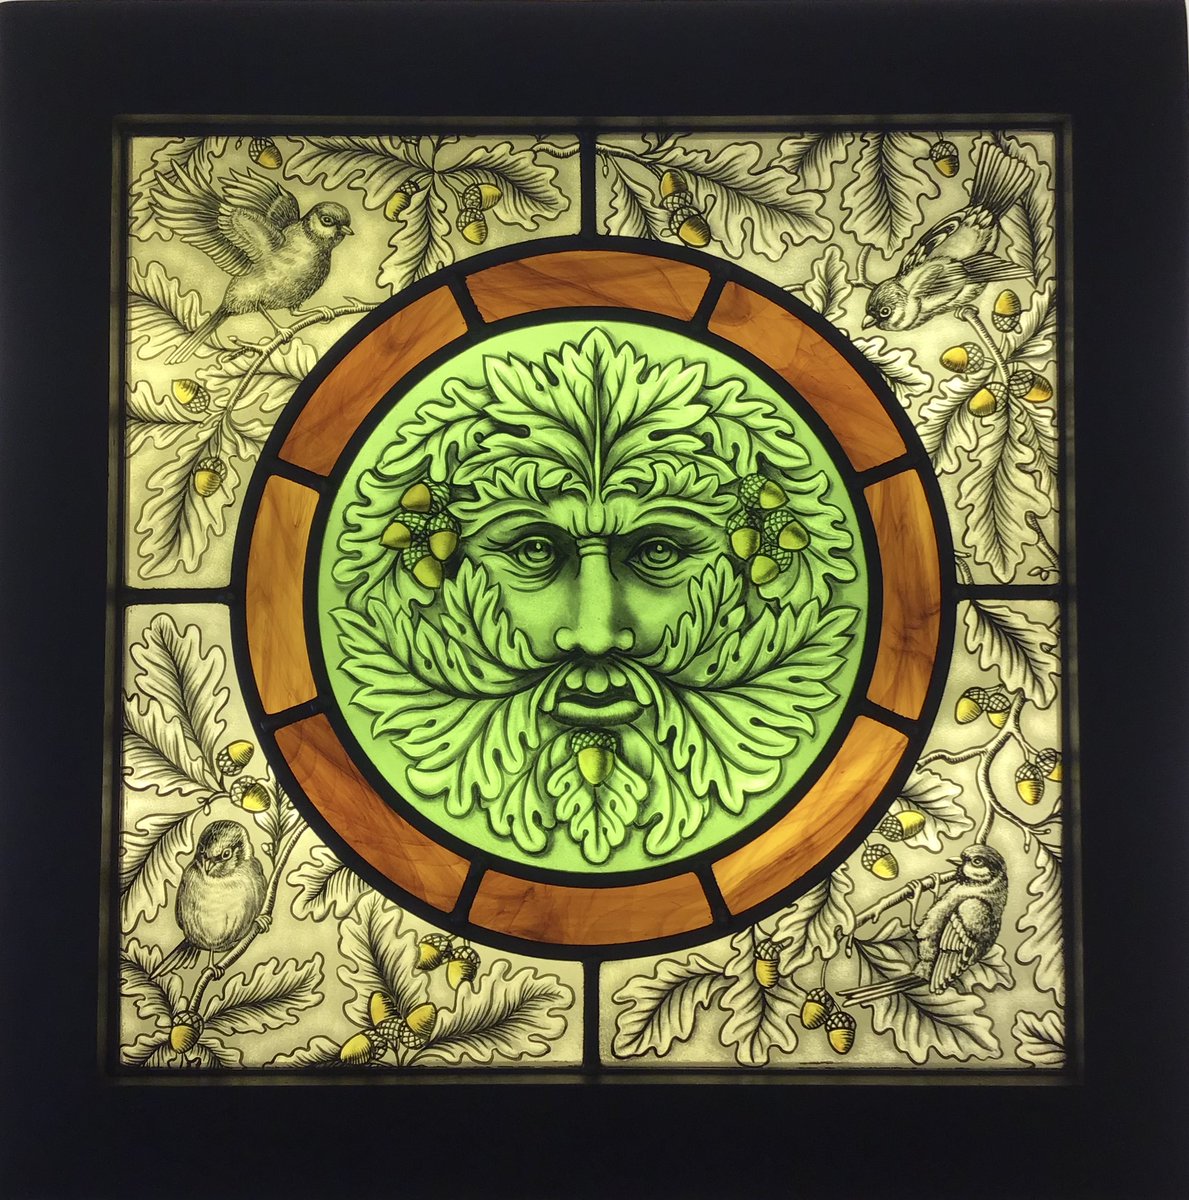 Green Man with Birds, Stained Glass Panel 🌿#stainedglass #suncatcher #greenman #green #spring #rebirth #decorativeart #birds #leaves #acorns #hastings #nature #mythology #glassart #interiors #window